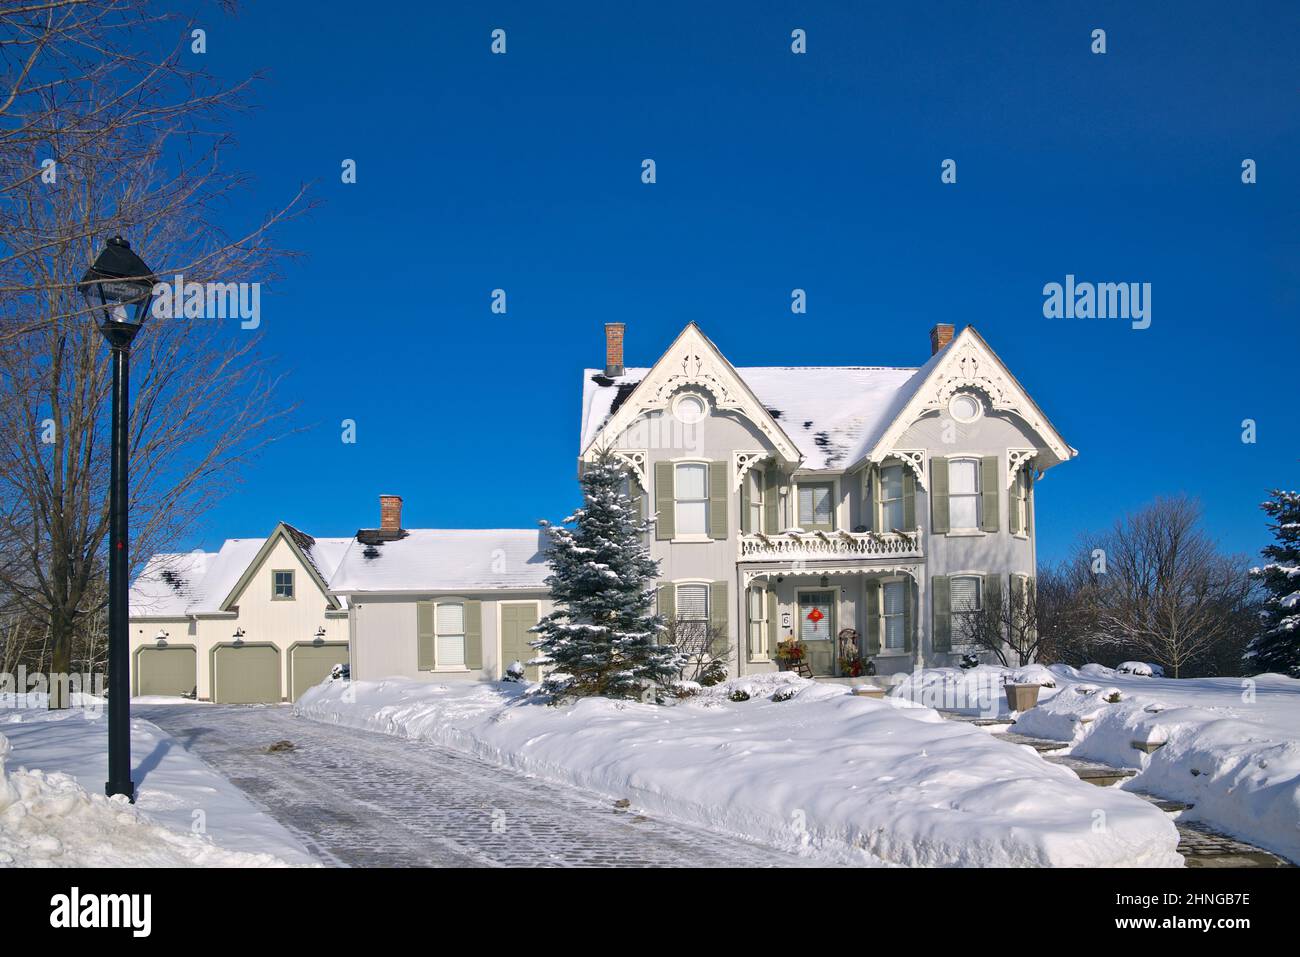 Victorian-style house exterior with street lamp in winter. Stock Photo